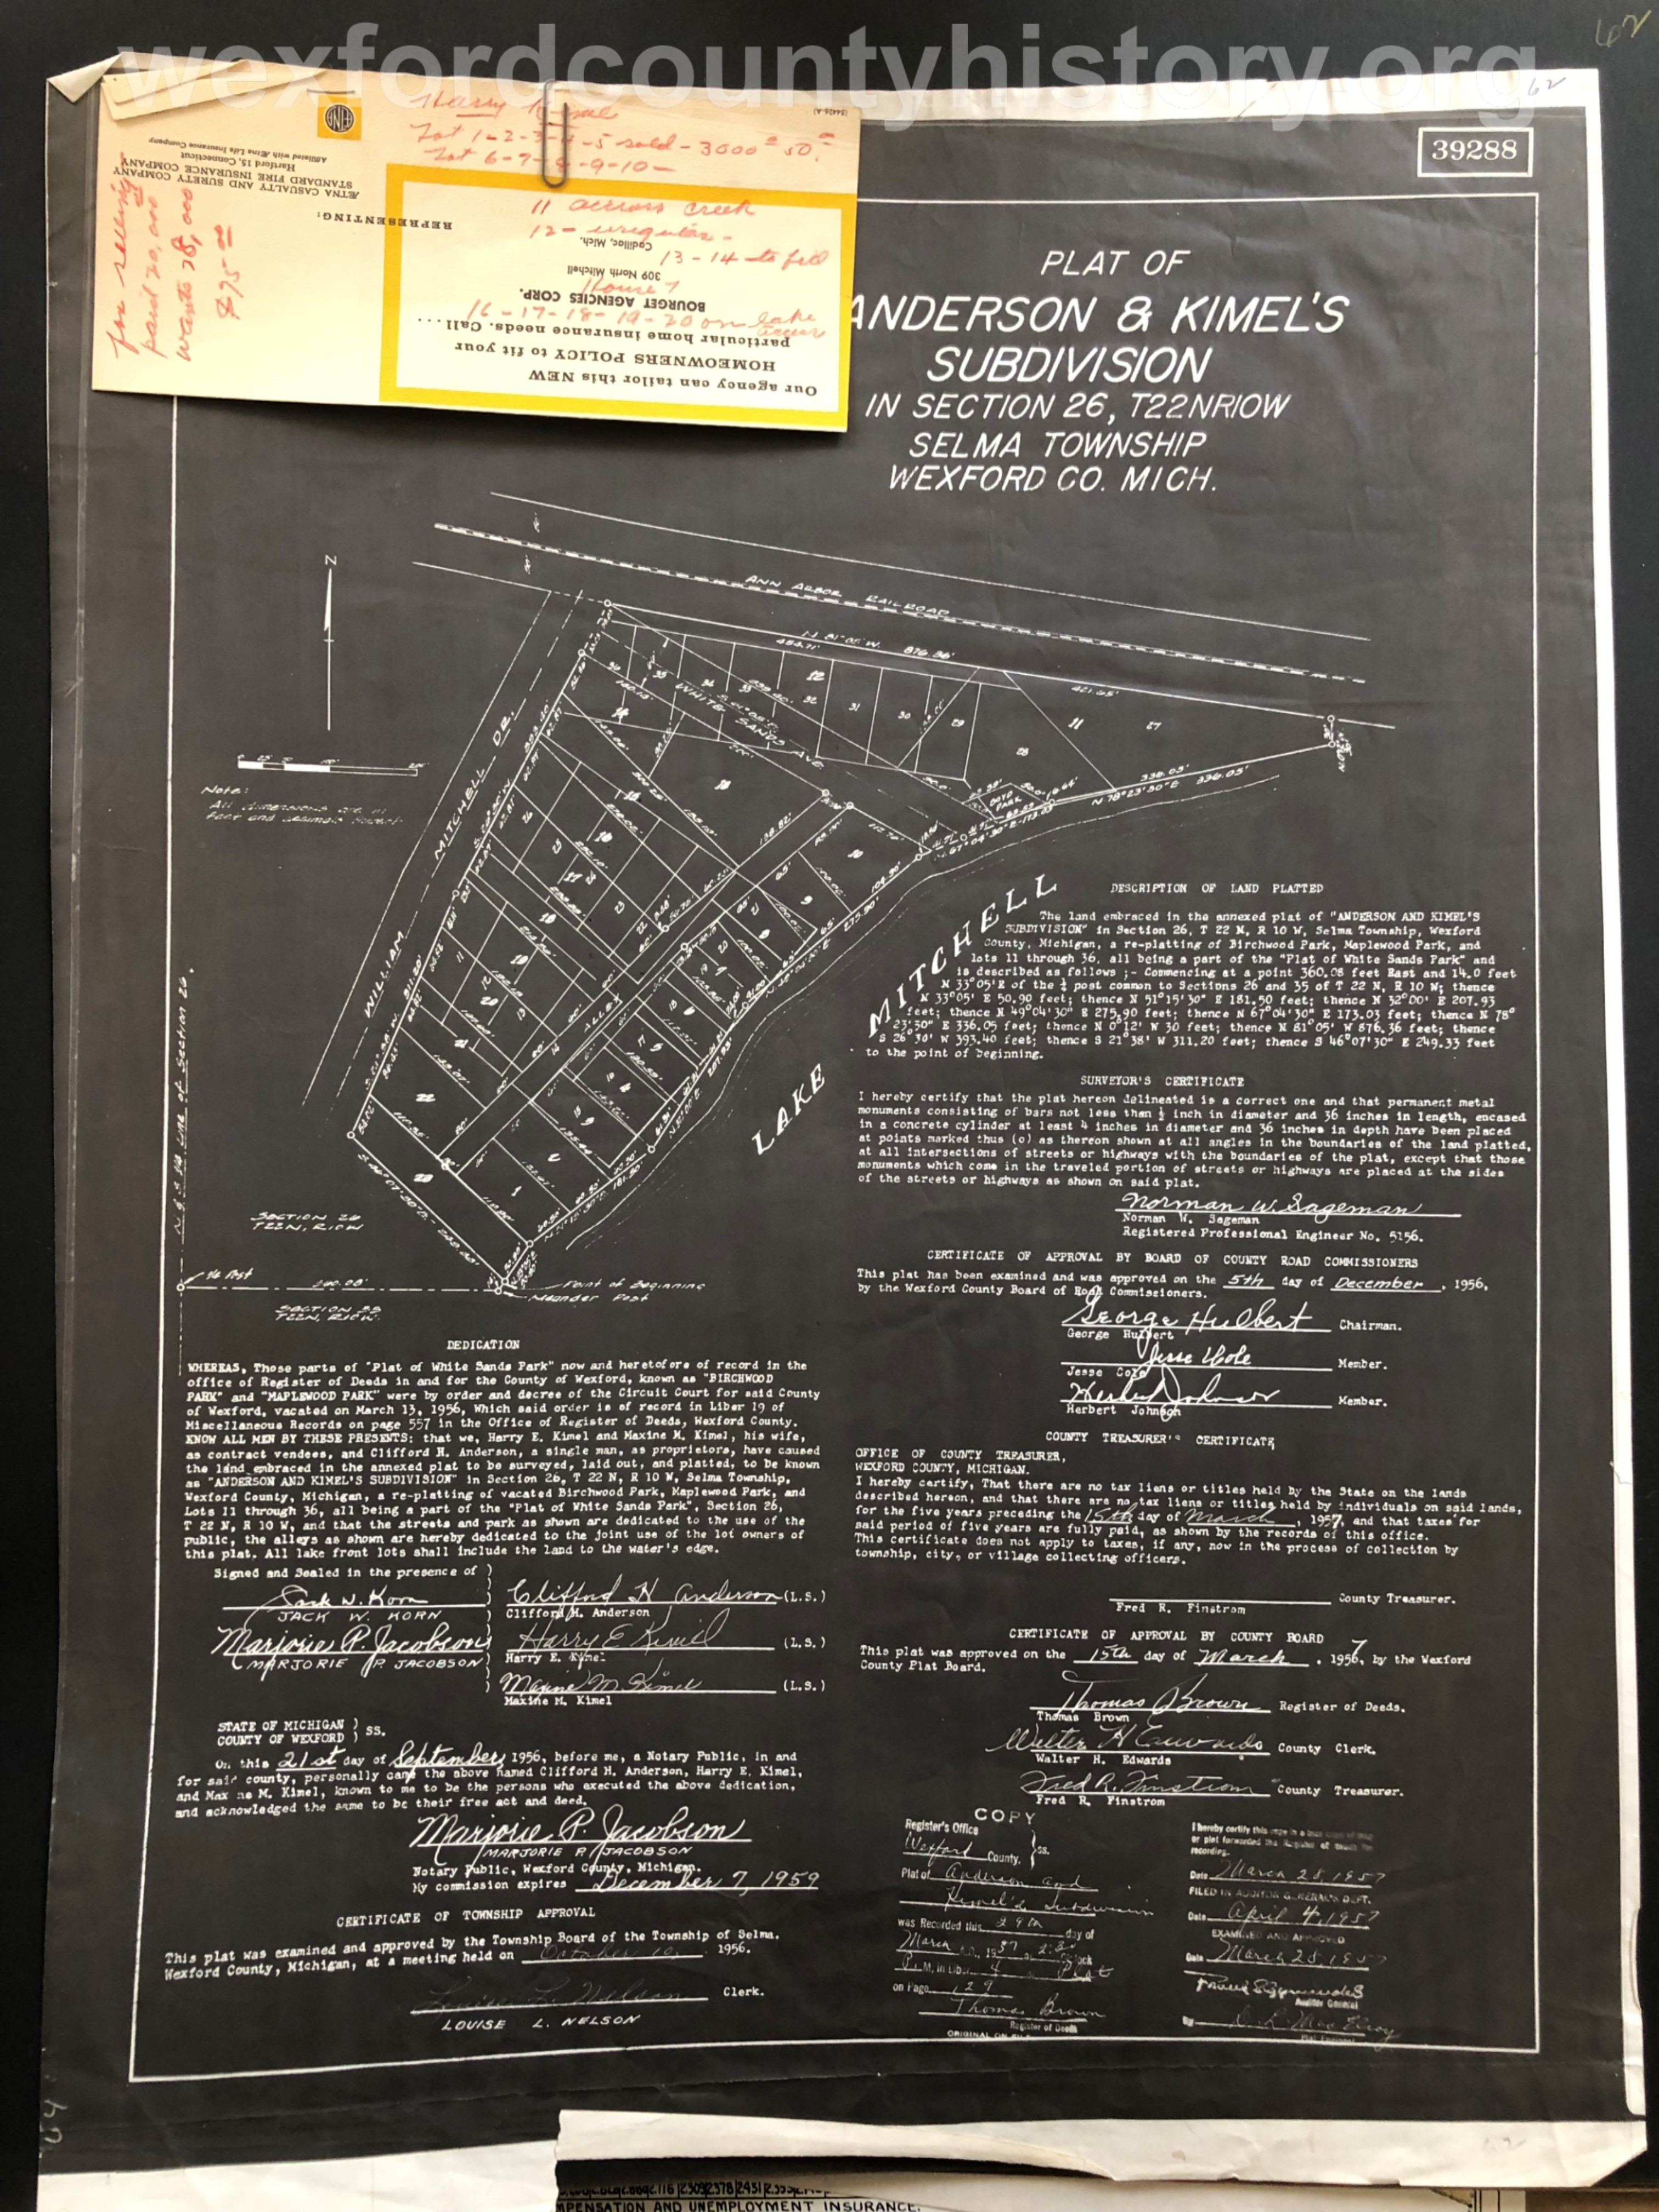 1956 - Anderson And Kimel's Subdivision